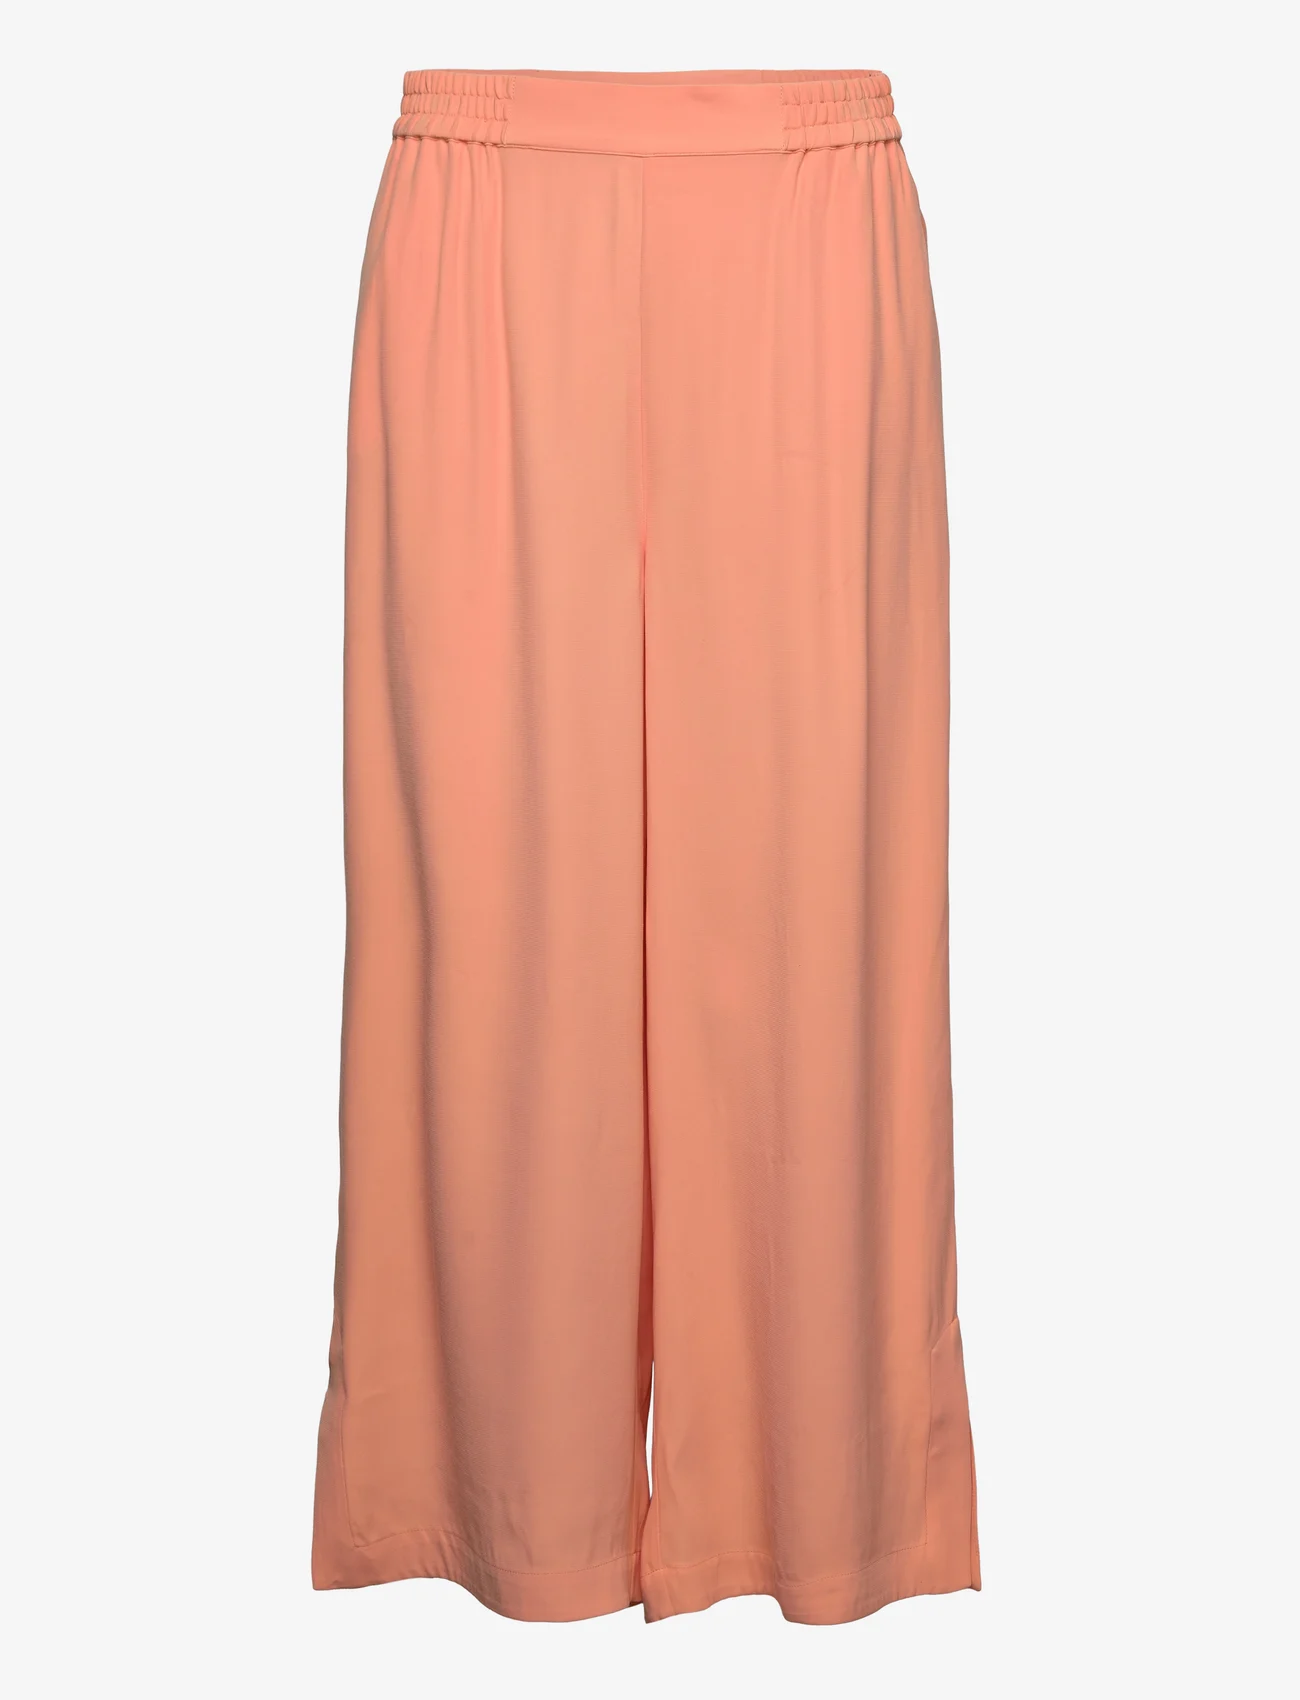 RODEBJER - Rodebjer Sigrid Twill - juhlamuotia outlet-hintaan - peach perfect - 0